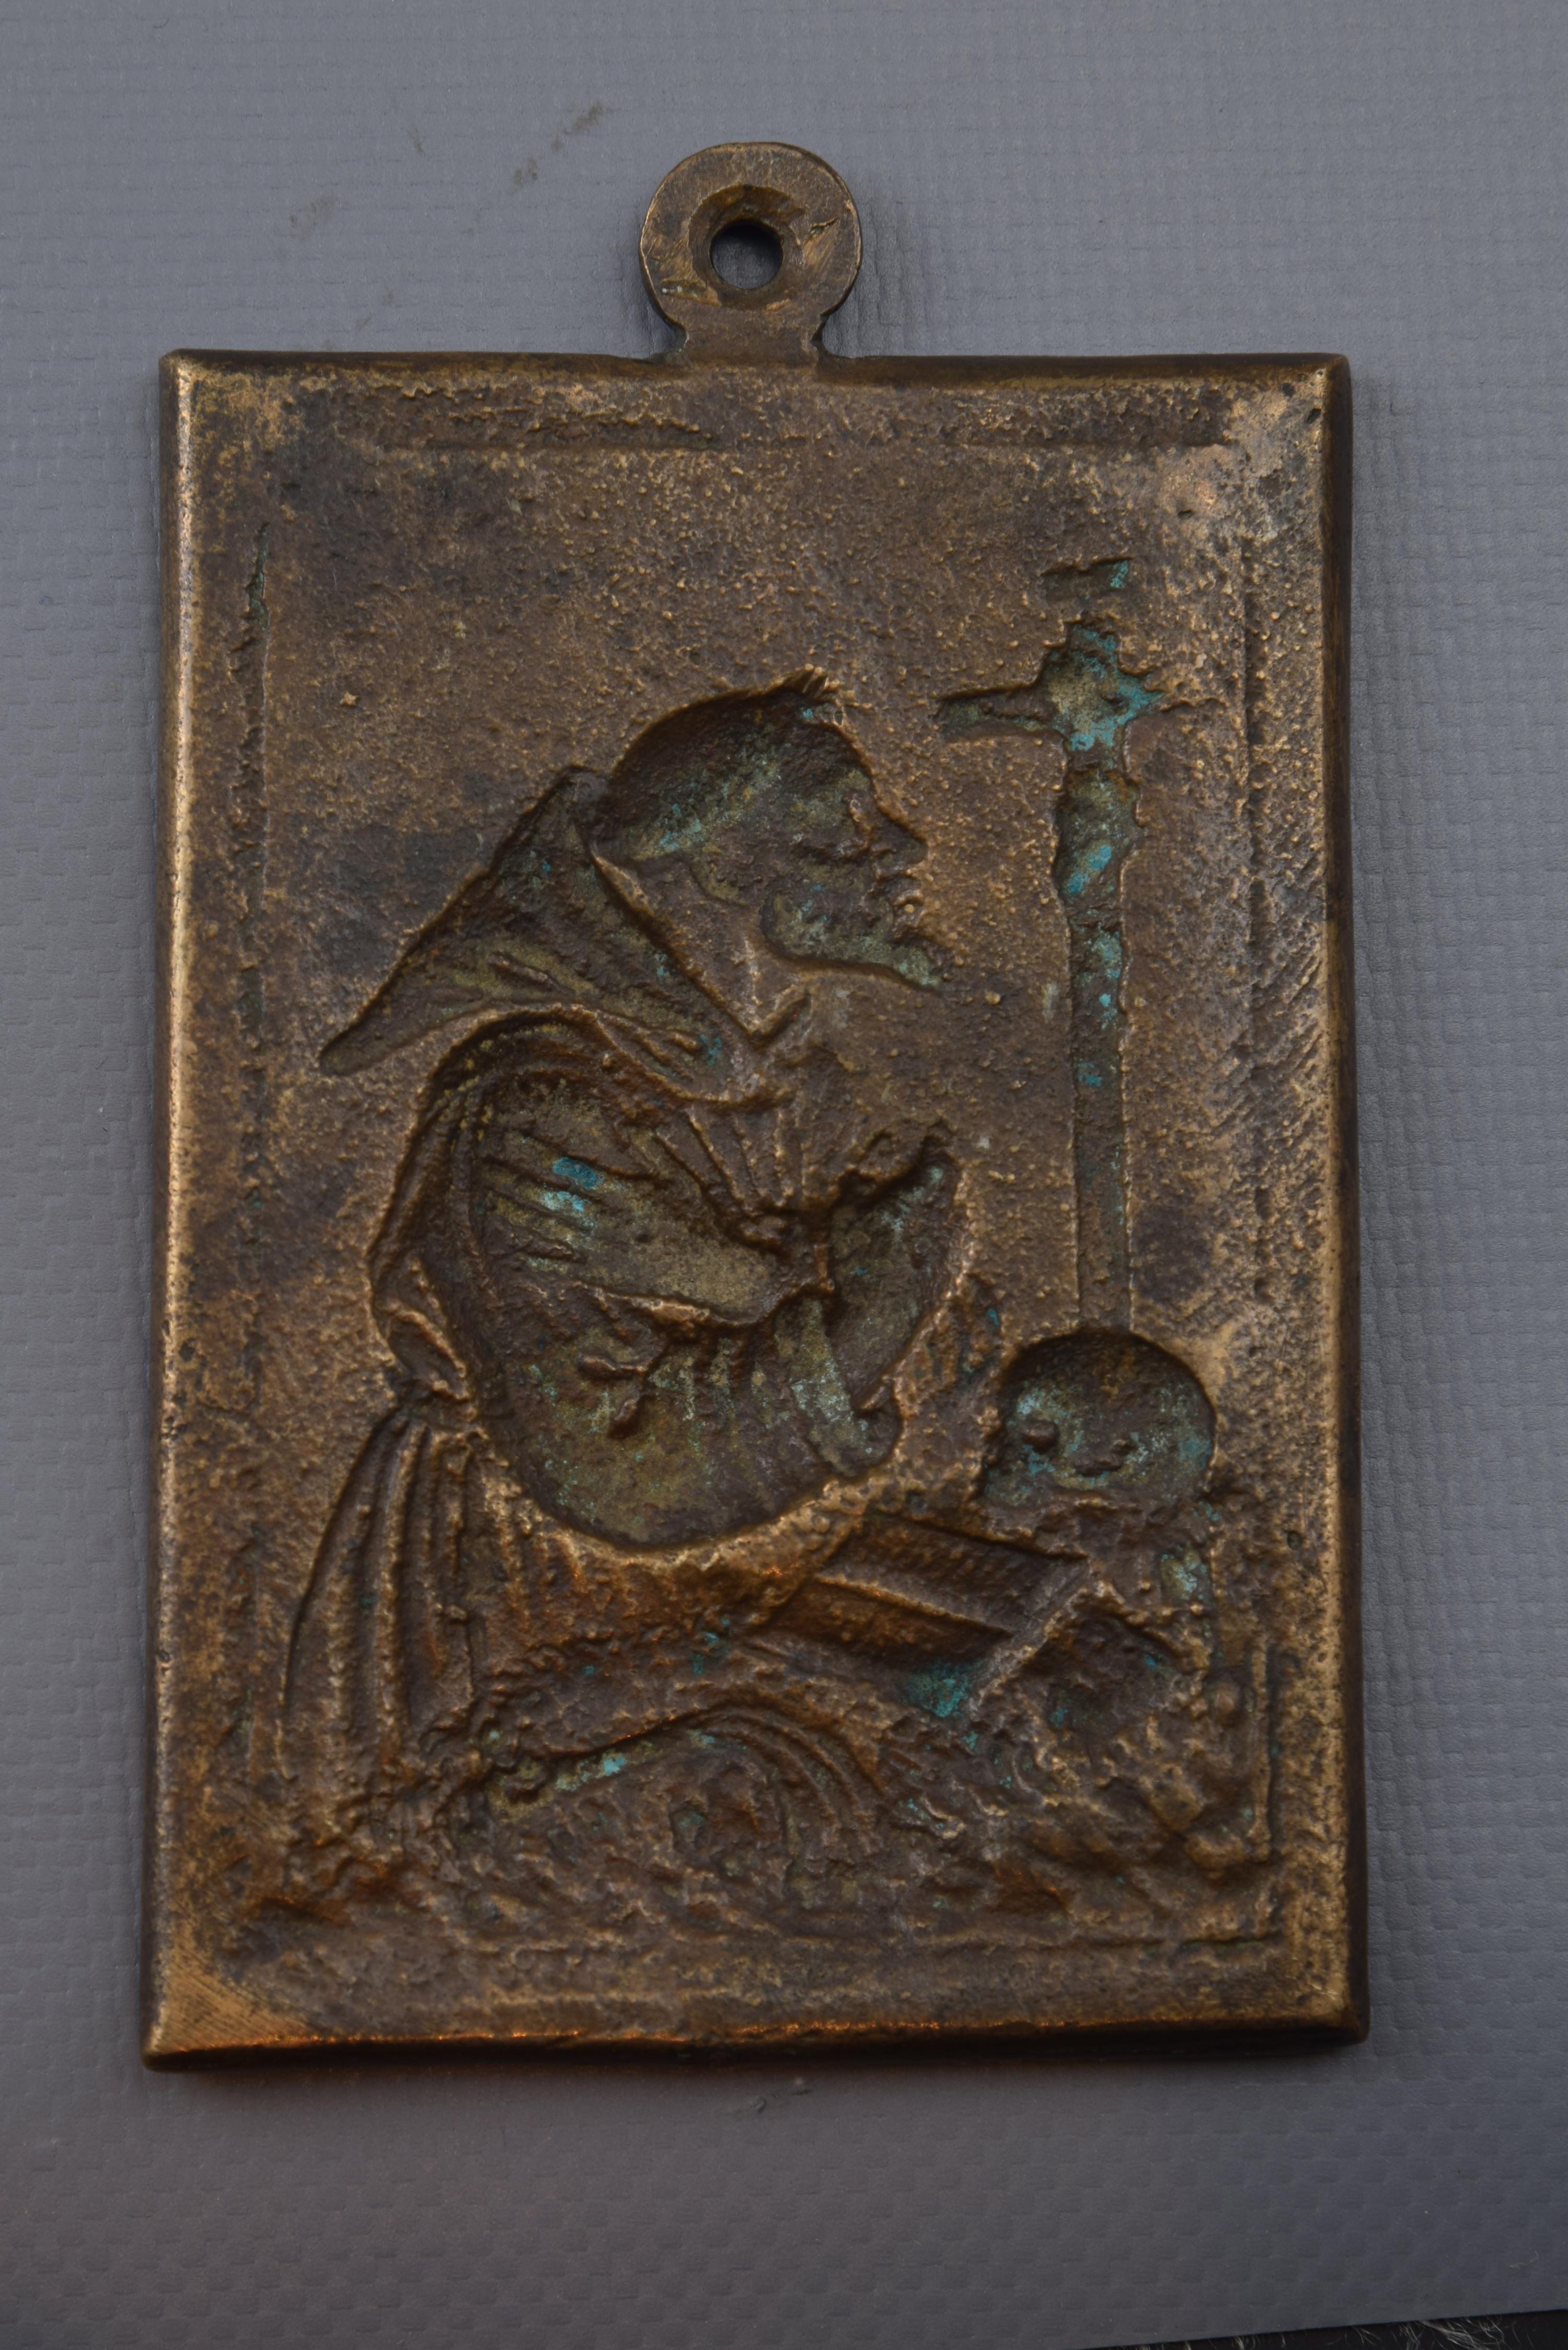 Devotional plaque, San Francisco de Asis, bronze, 17th century.
Devotional plate made of rectangular bronze that has a ring at the top and a simple frame to highlight the relief of its front. The Saint, dressed in Franciscan habit and cord, crosses